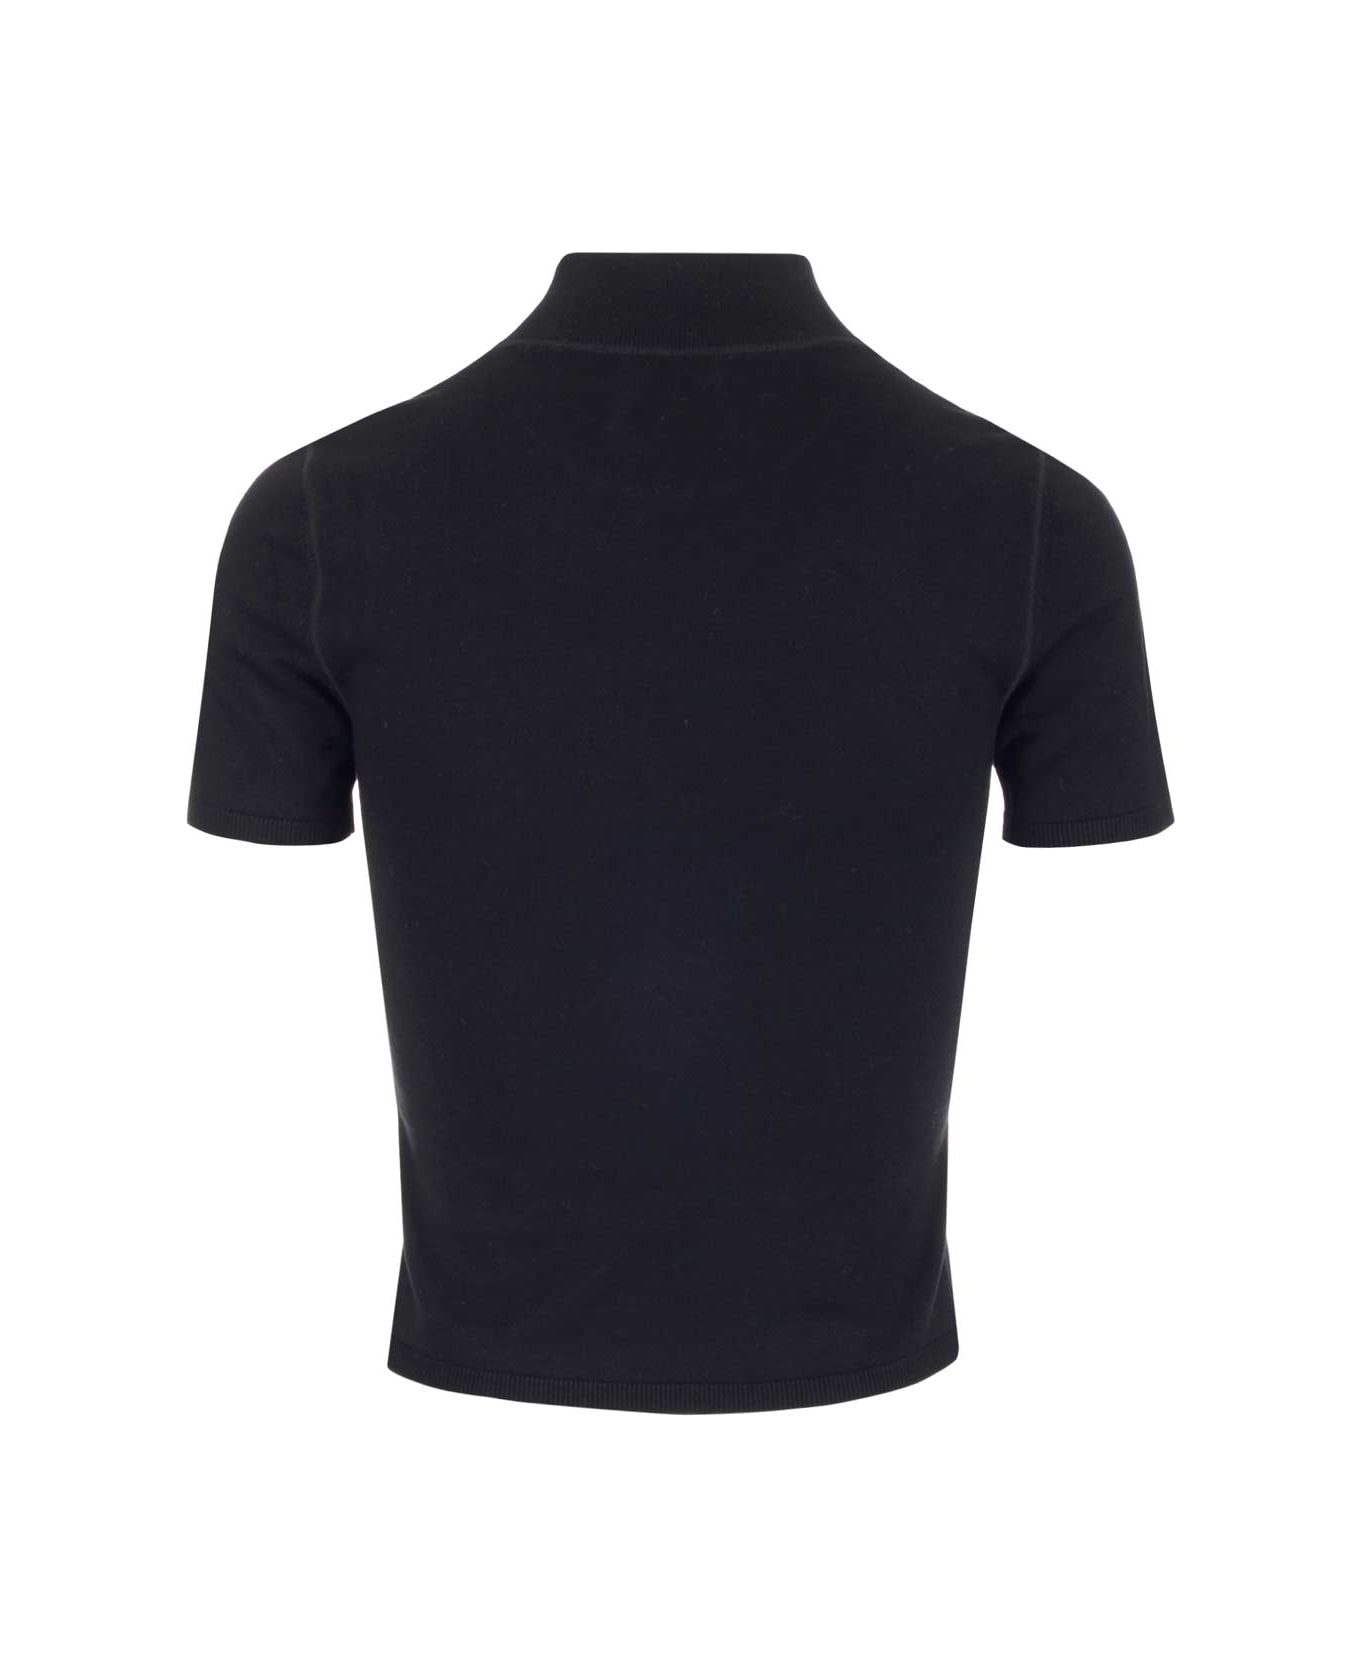 T by Alexander Wang Viscose Fitted Top - BLACK